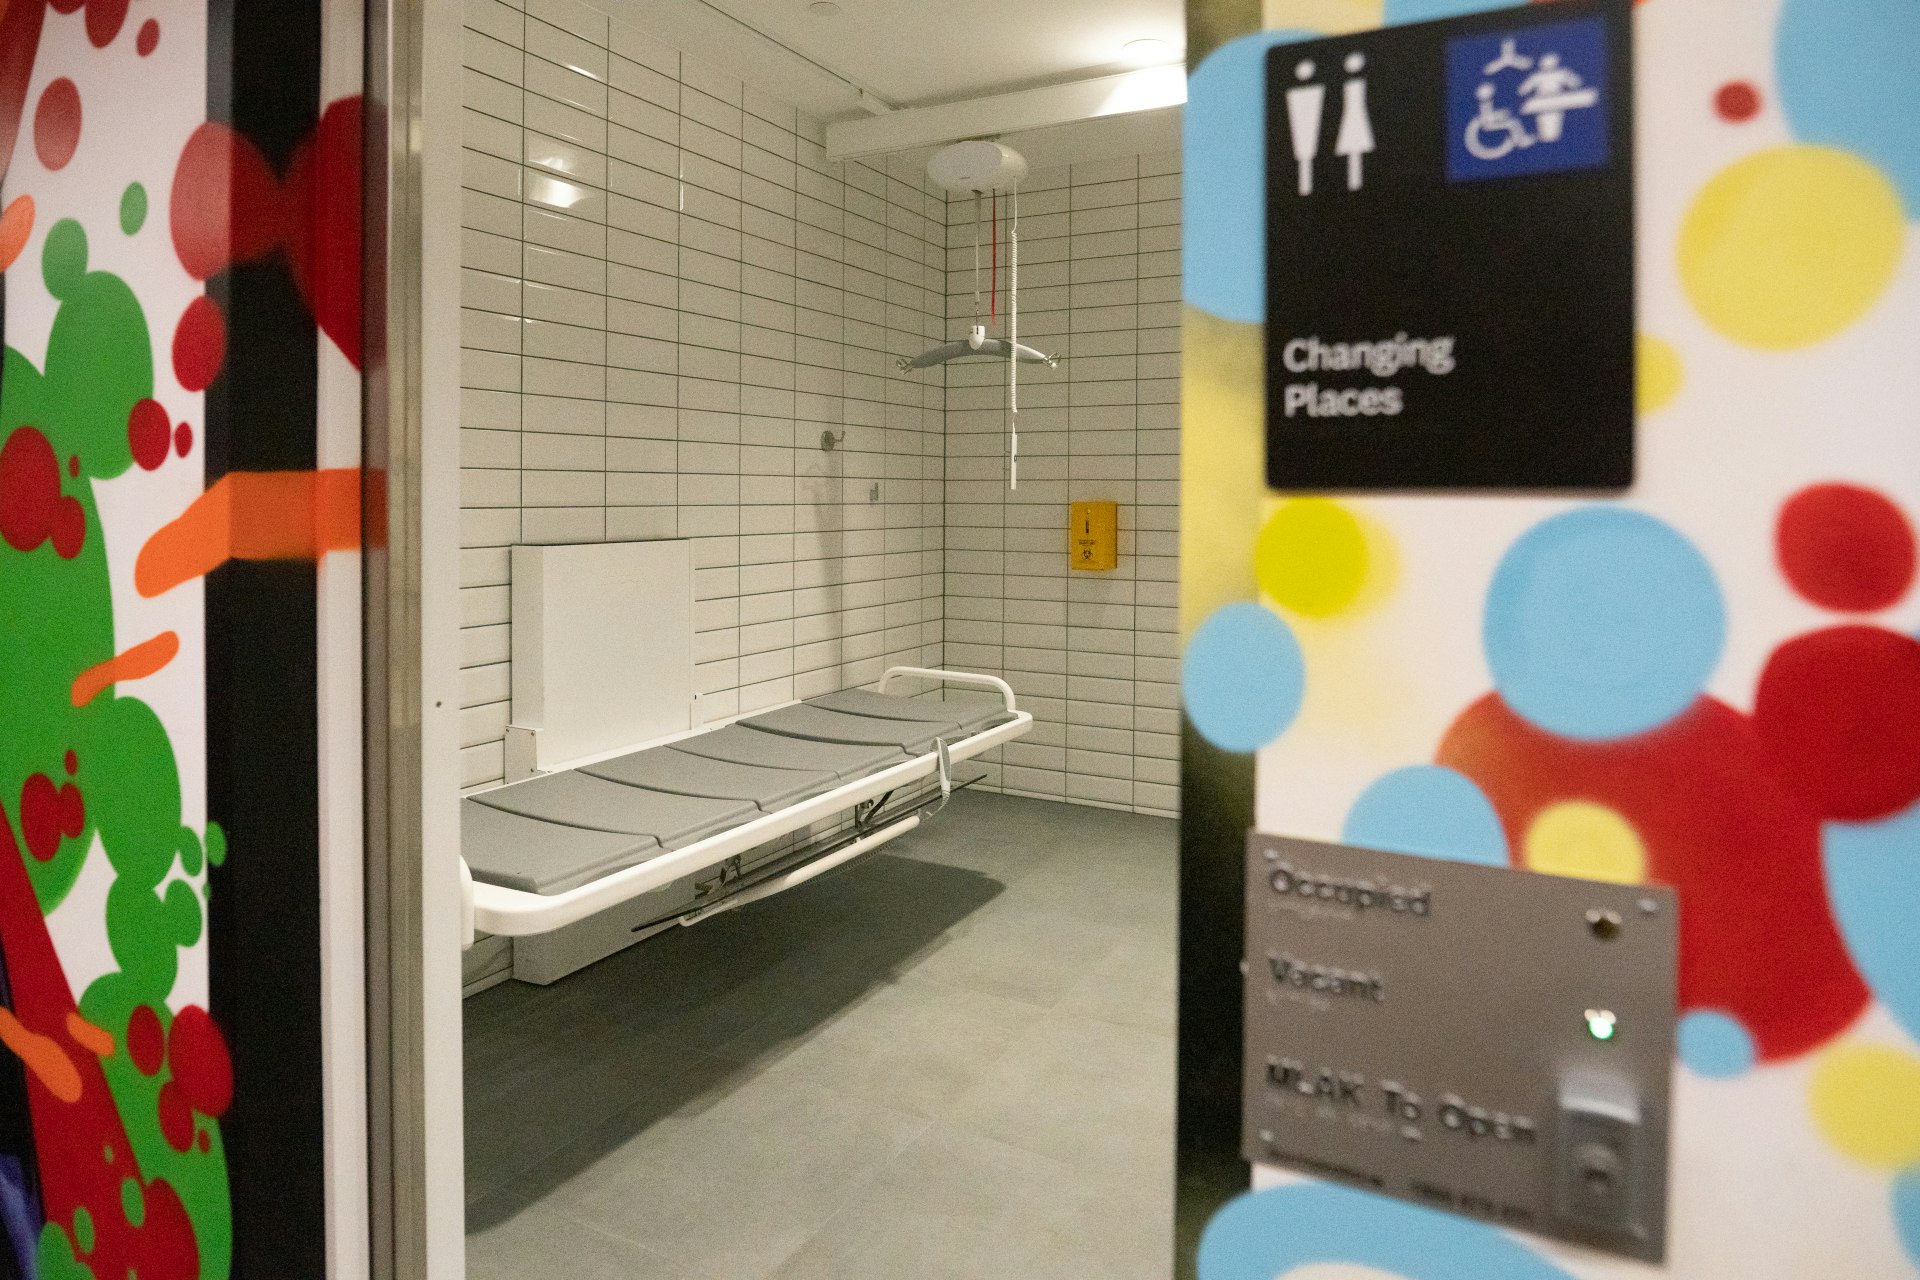 Changing Places bathroom entry at Fed Square